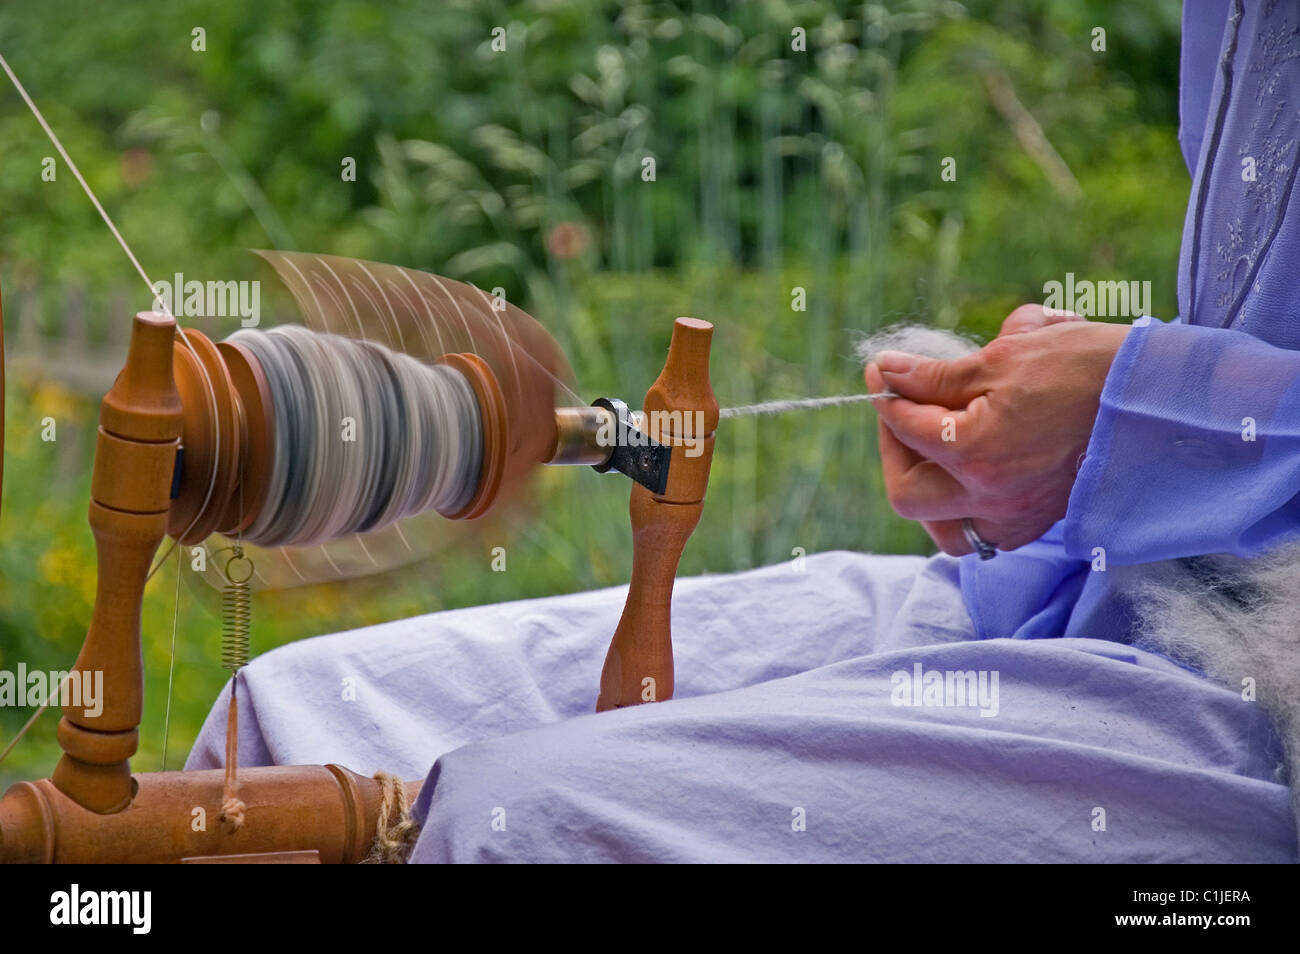 Spinning Wheel For Making Yarn From Wool Fibers Vintage Rustic Equipment  Stock Photo - Download Image Now - iStock